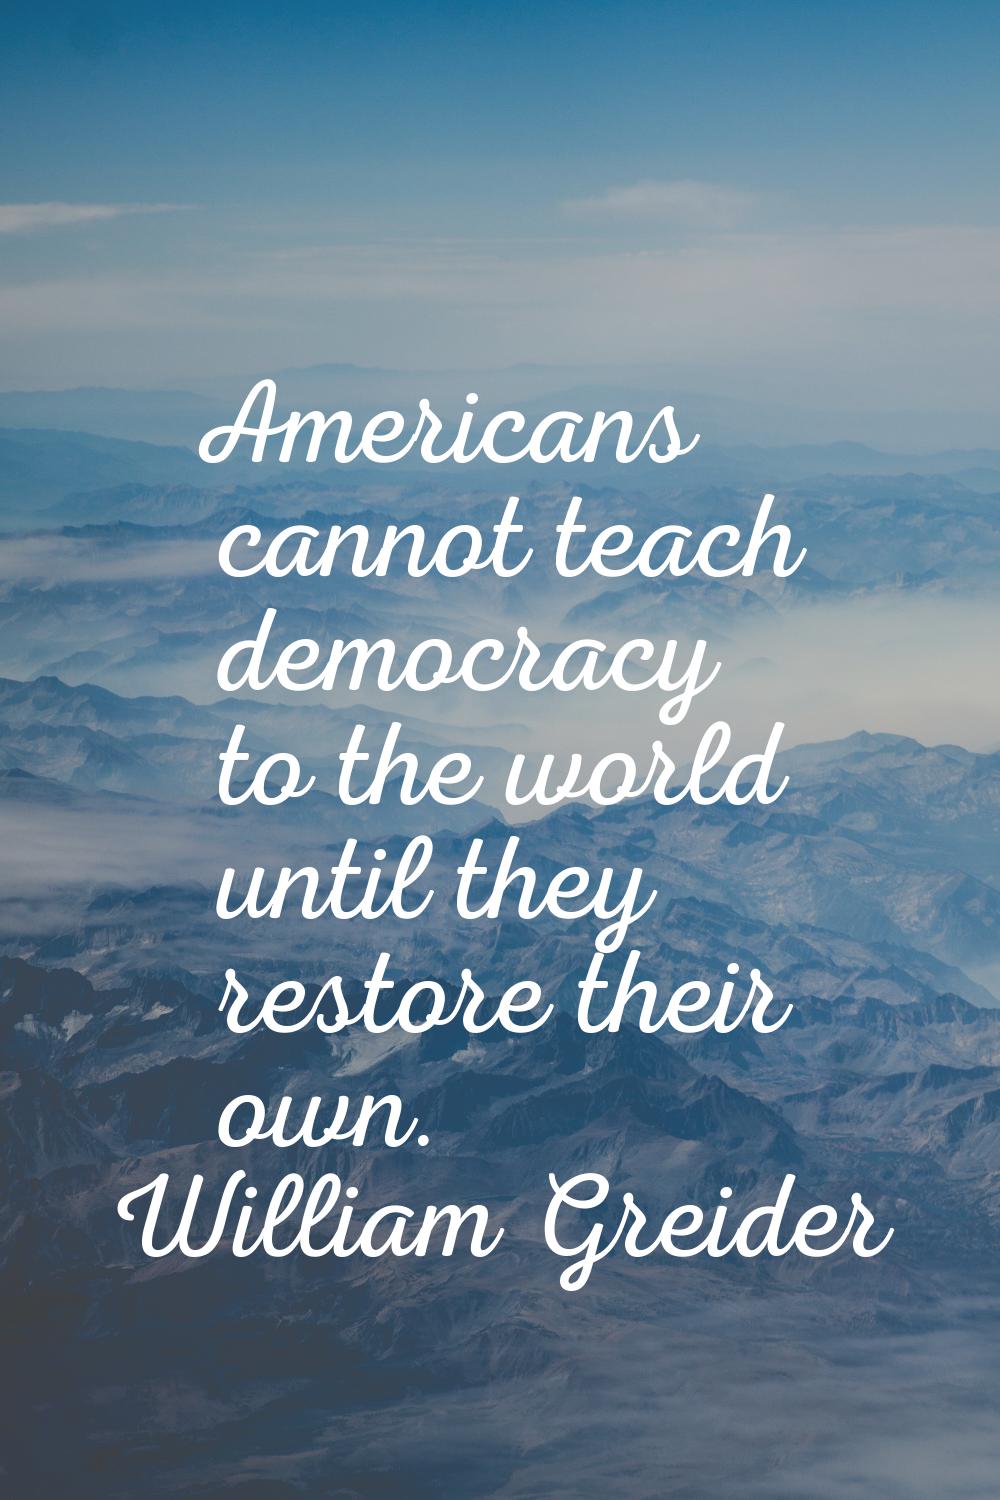 Americans cannot teach democracy to the world until they restore their own.